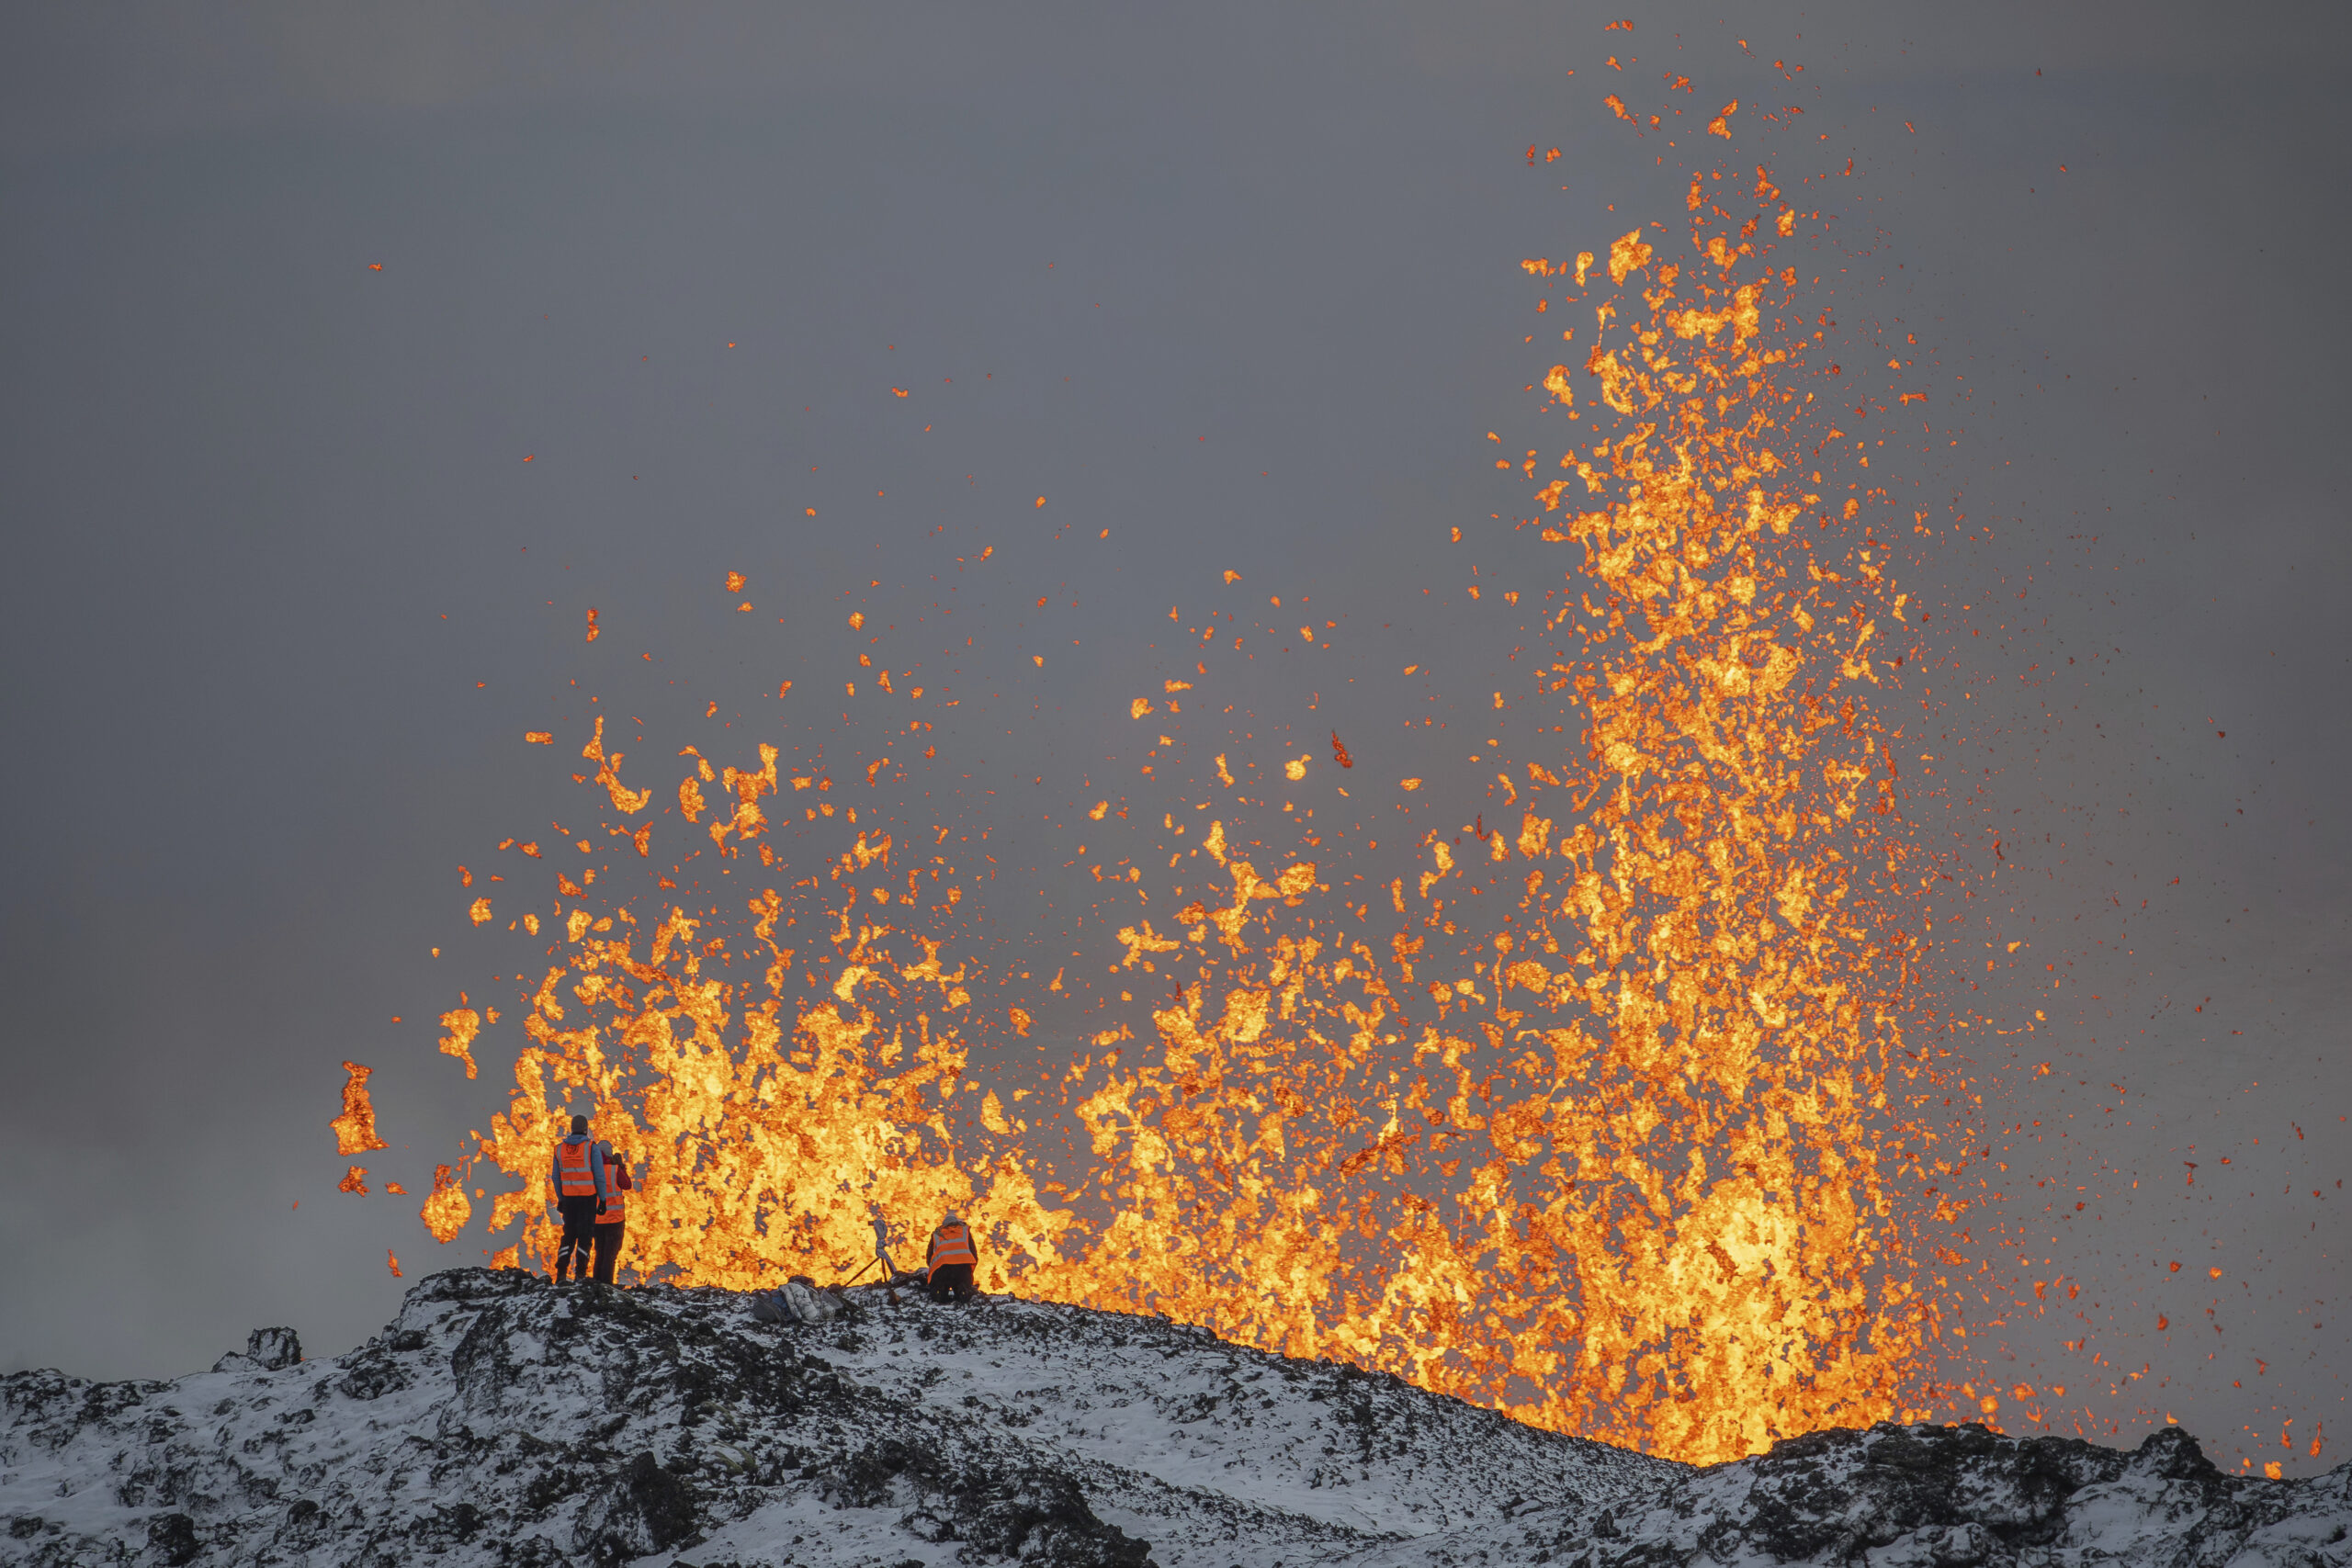 ICELAND — Brave men taking stock of Mother Nature’s power: Scientists from the University of Iceland take measurements and samples standing on the ridge in front of the active part of the eruptive fissure of an active volcano in Grindavik on Iceland's Reykjanes Peninsula, Tuesday, Dec. 19, 2023.Photo: Marco Di Marco/AP